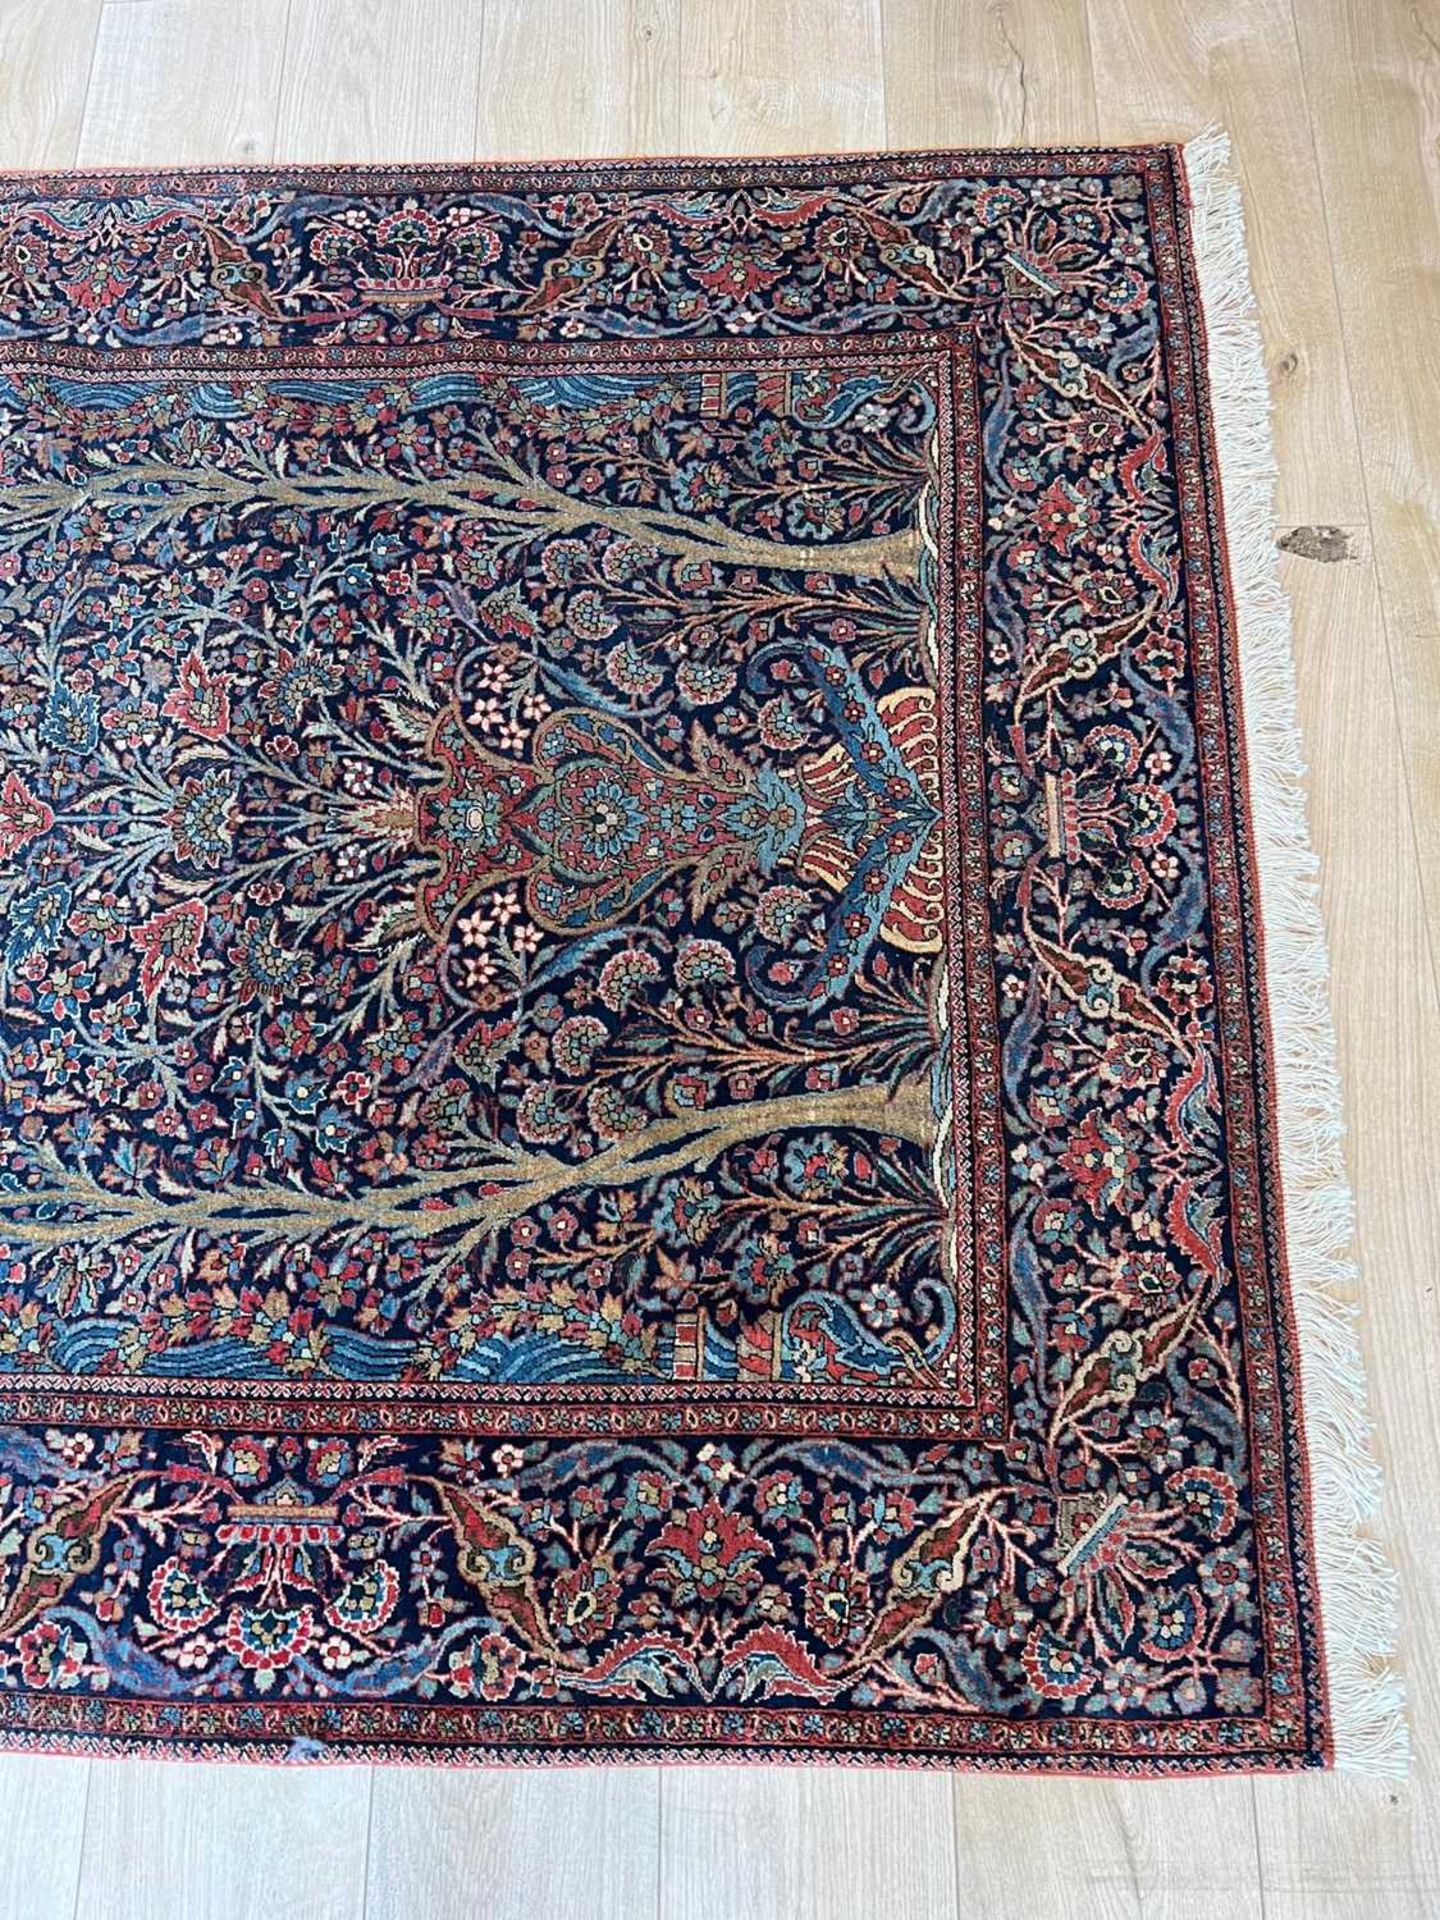 A FINE PAIR OF 1920'S MOHTASHAM KASHAN CARPETS - Image 12 of 38